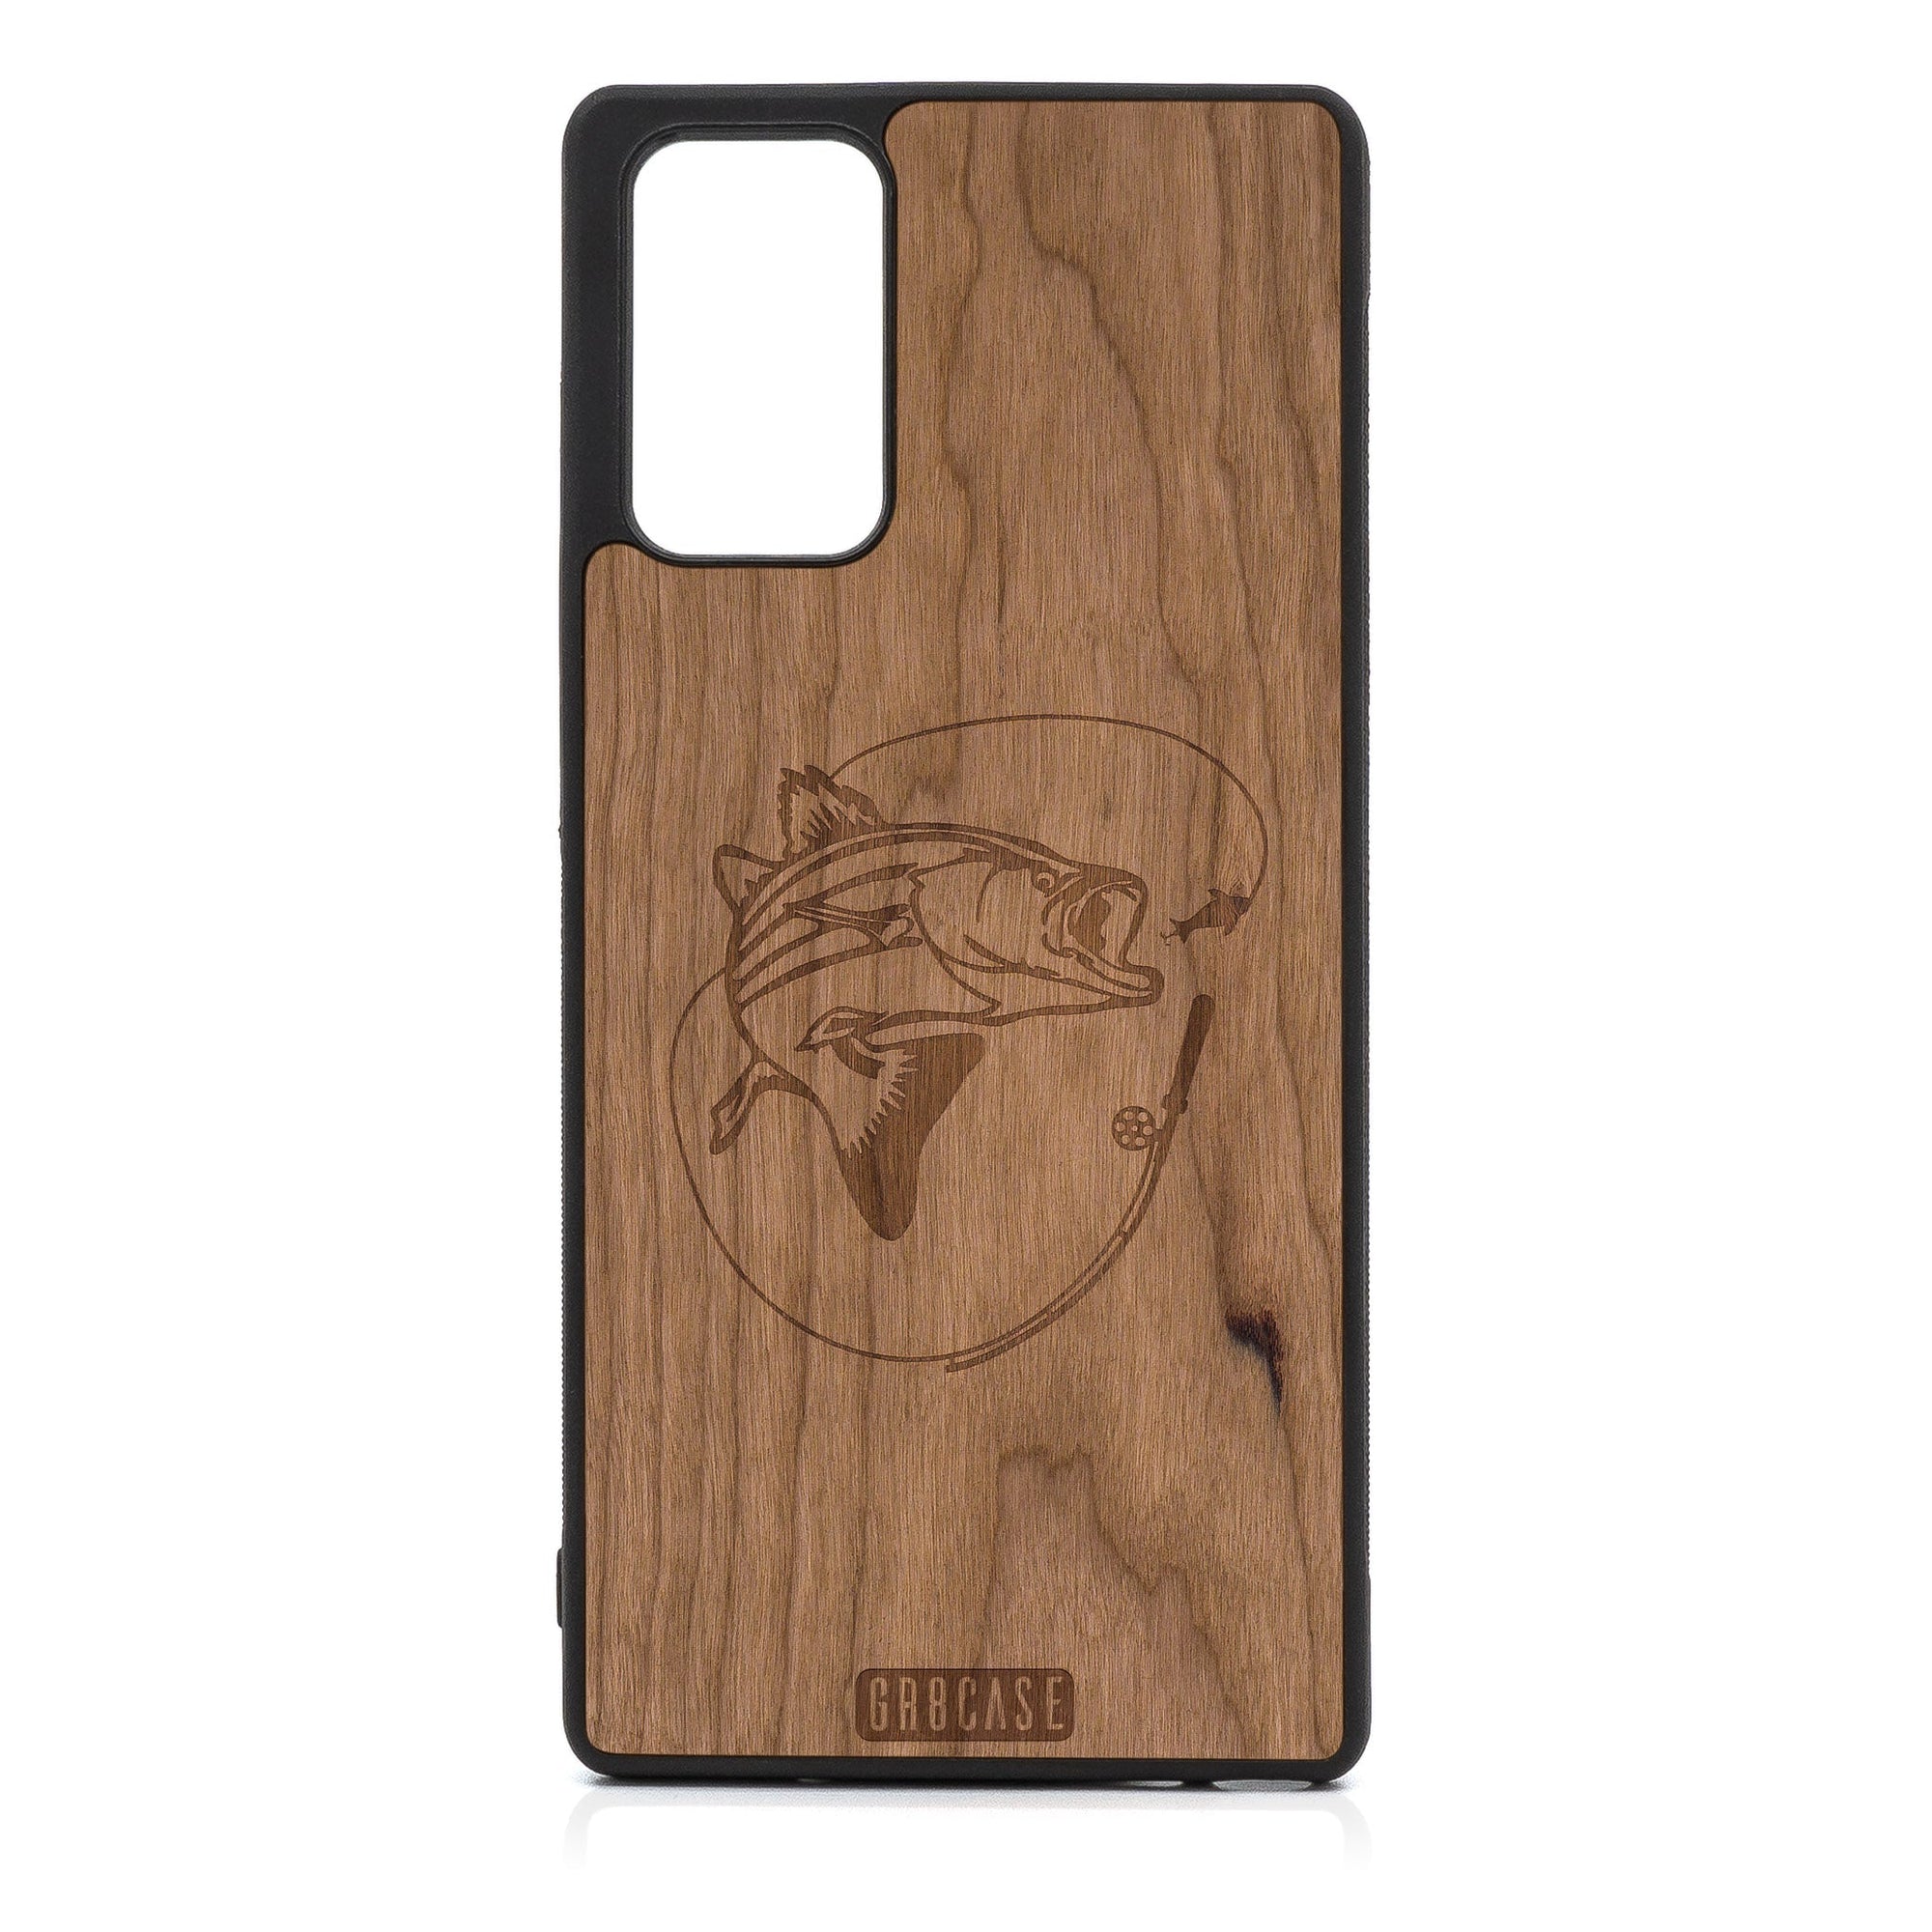 Fish and Reel Design Wood Case For Samsung Galaxy A33 5G